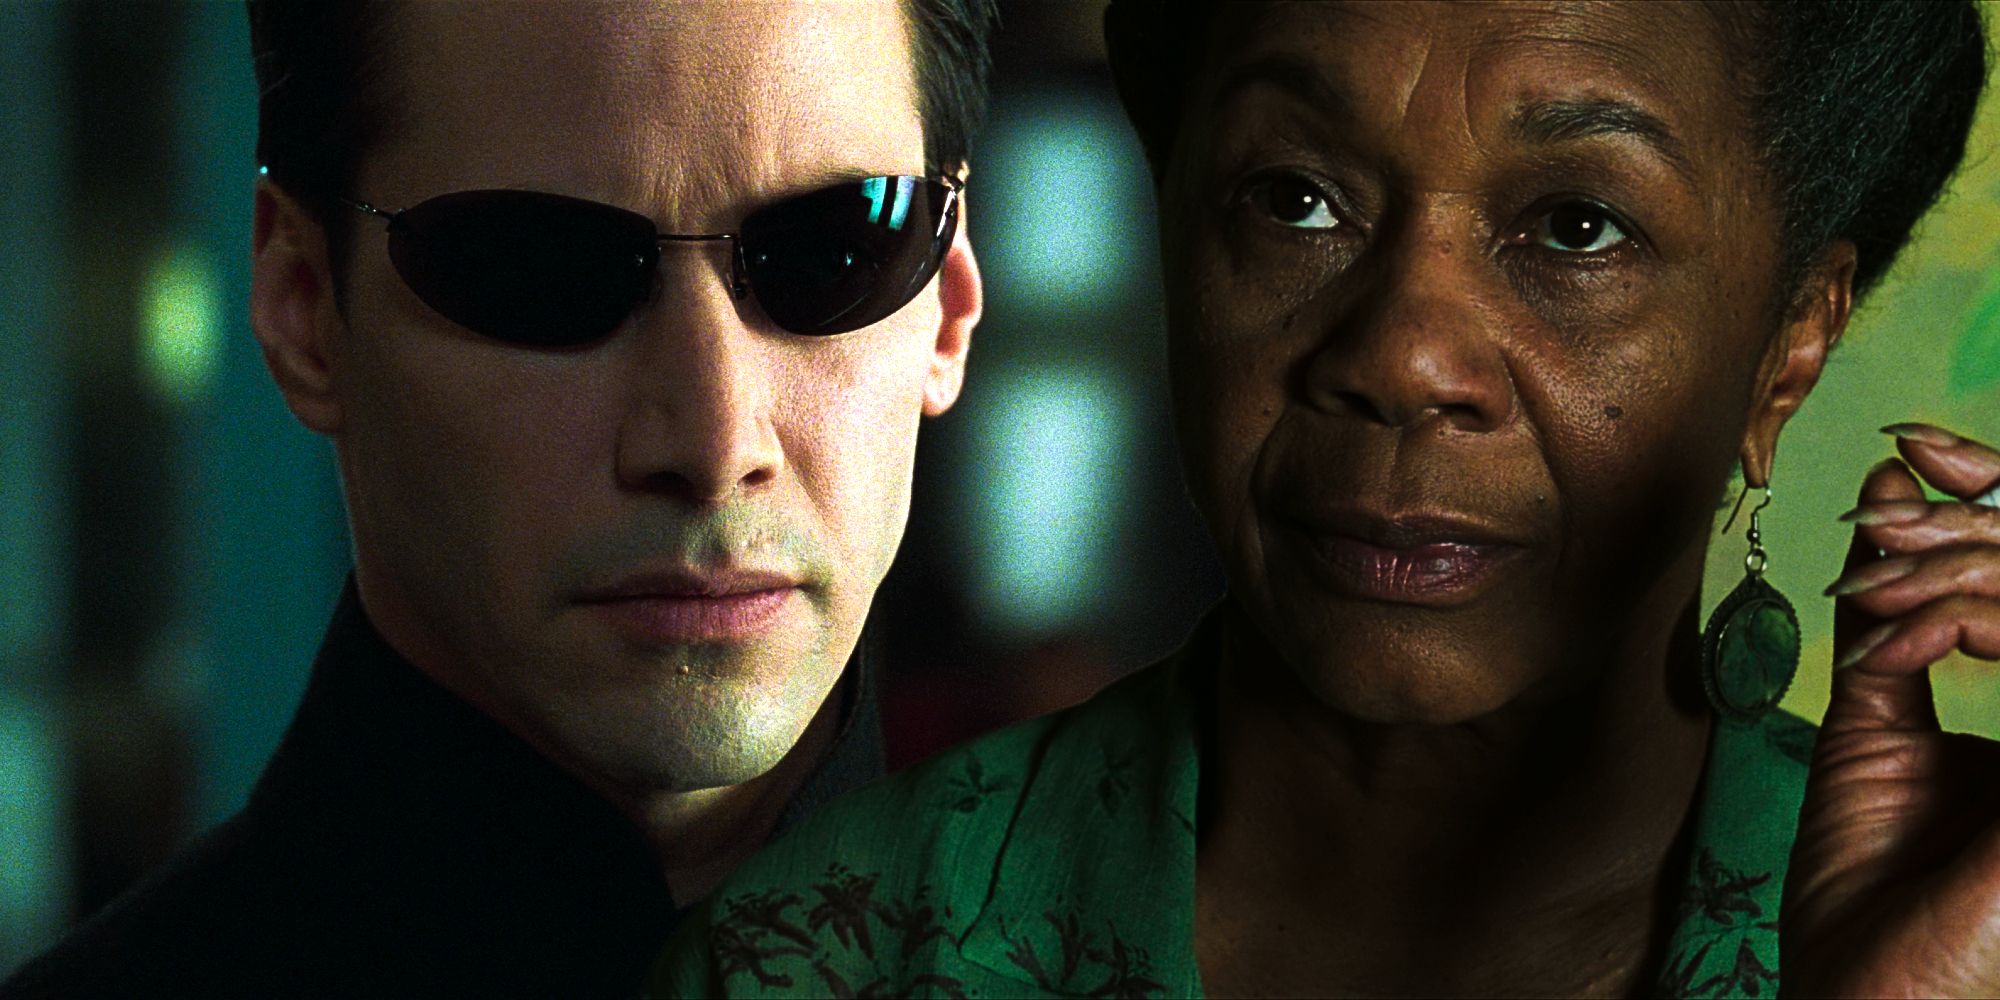 Neo and the Oracle in the Matrix movies